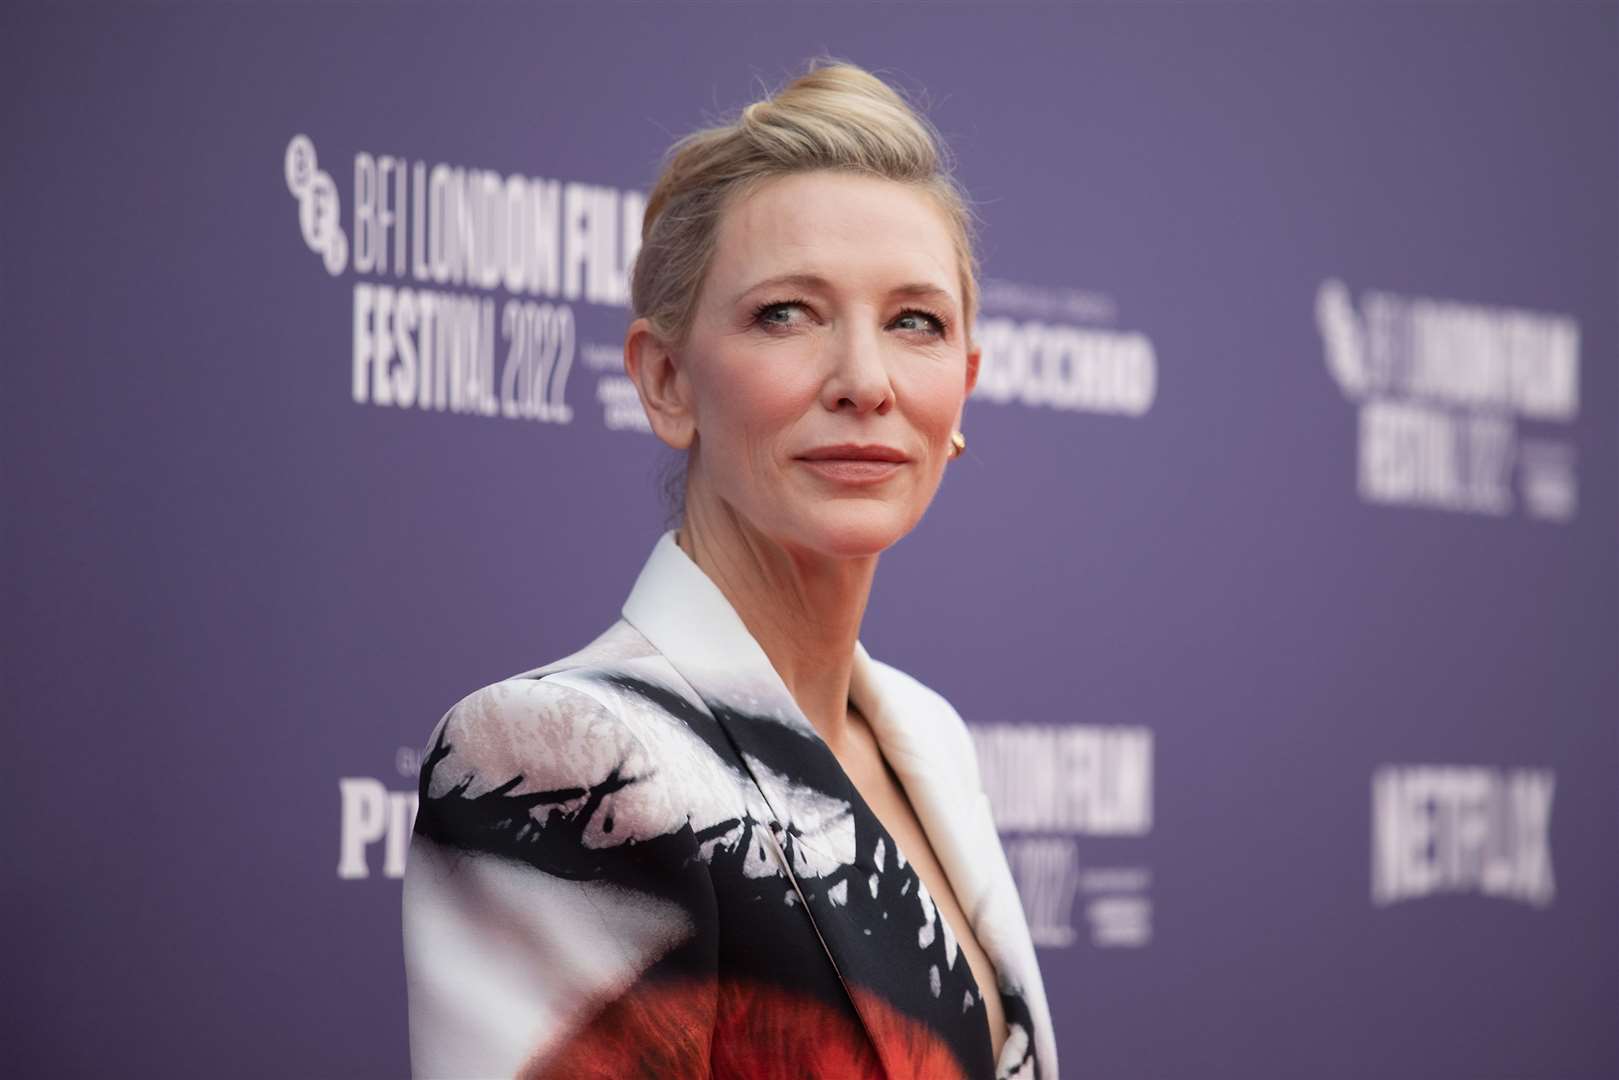 Cate Blanchett will narrate a section of the ceremony on Friday (Suzan Moore/PA)